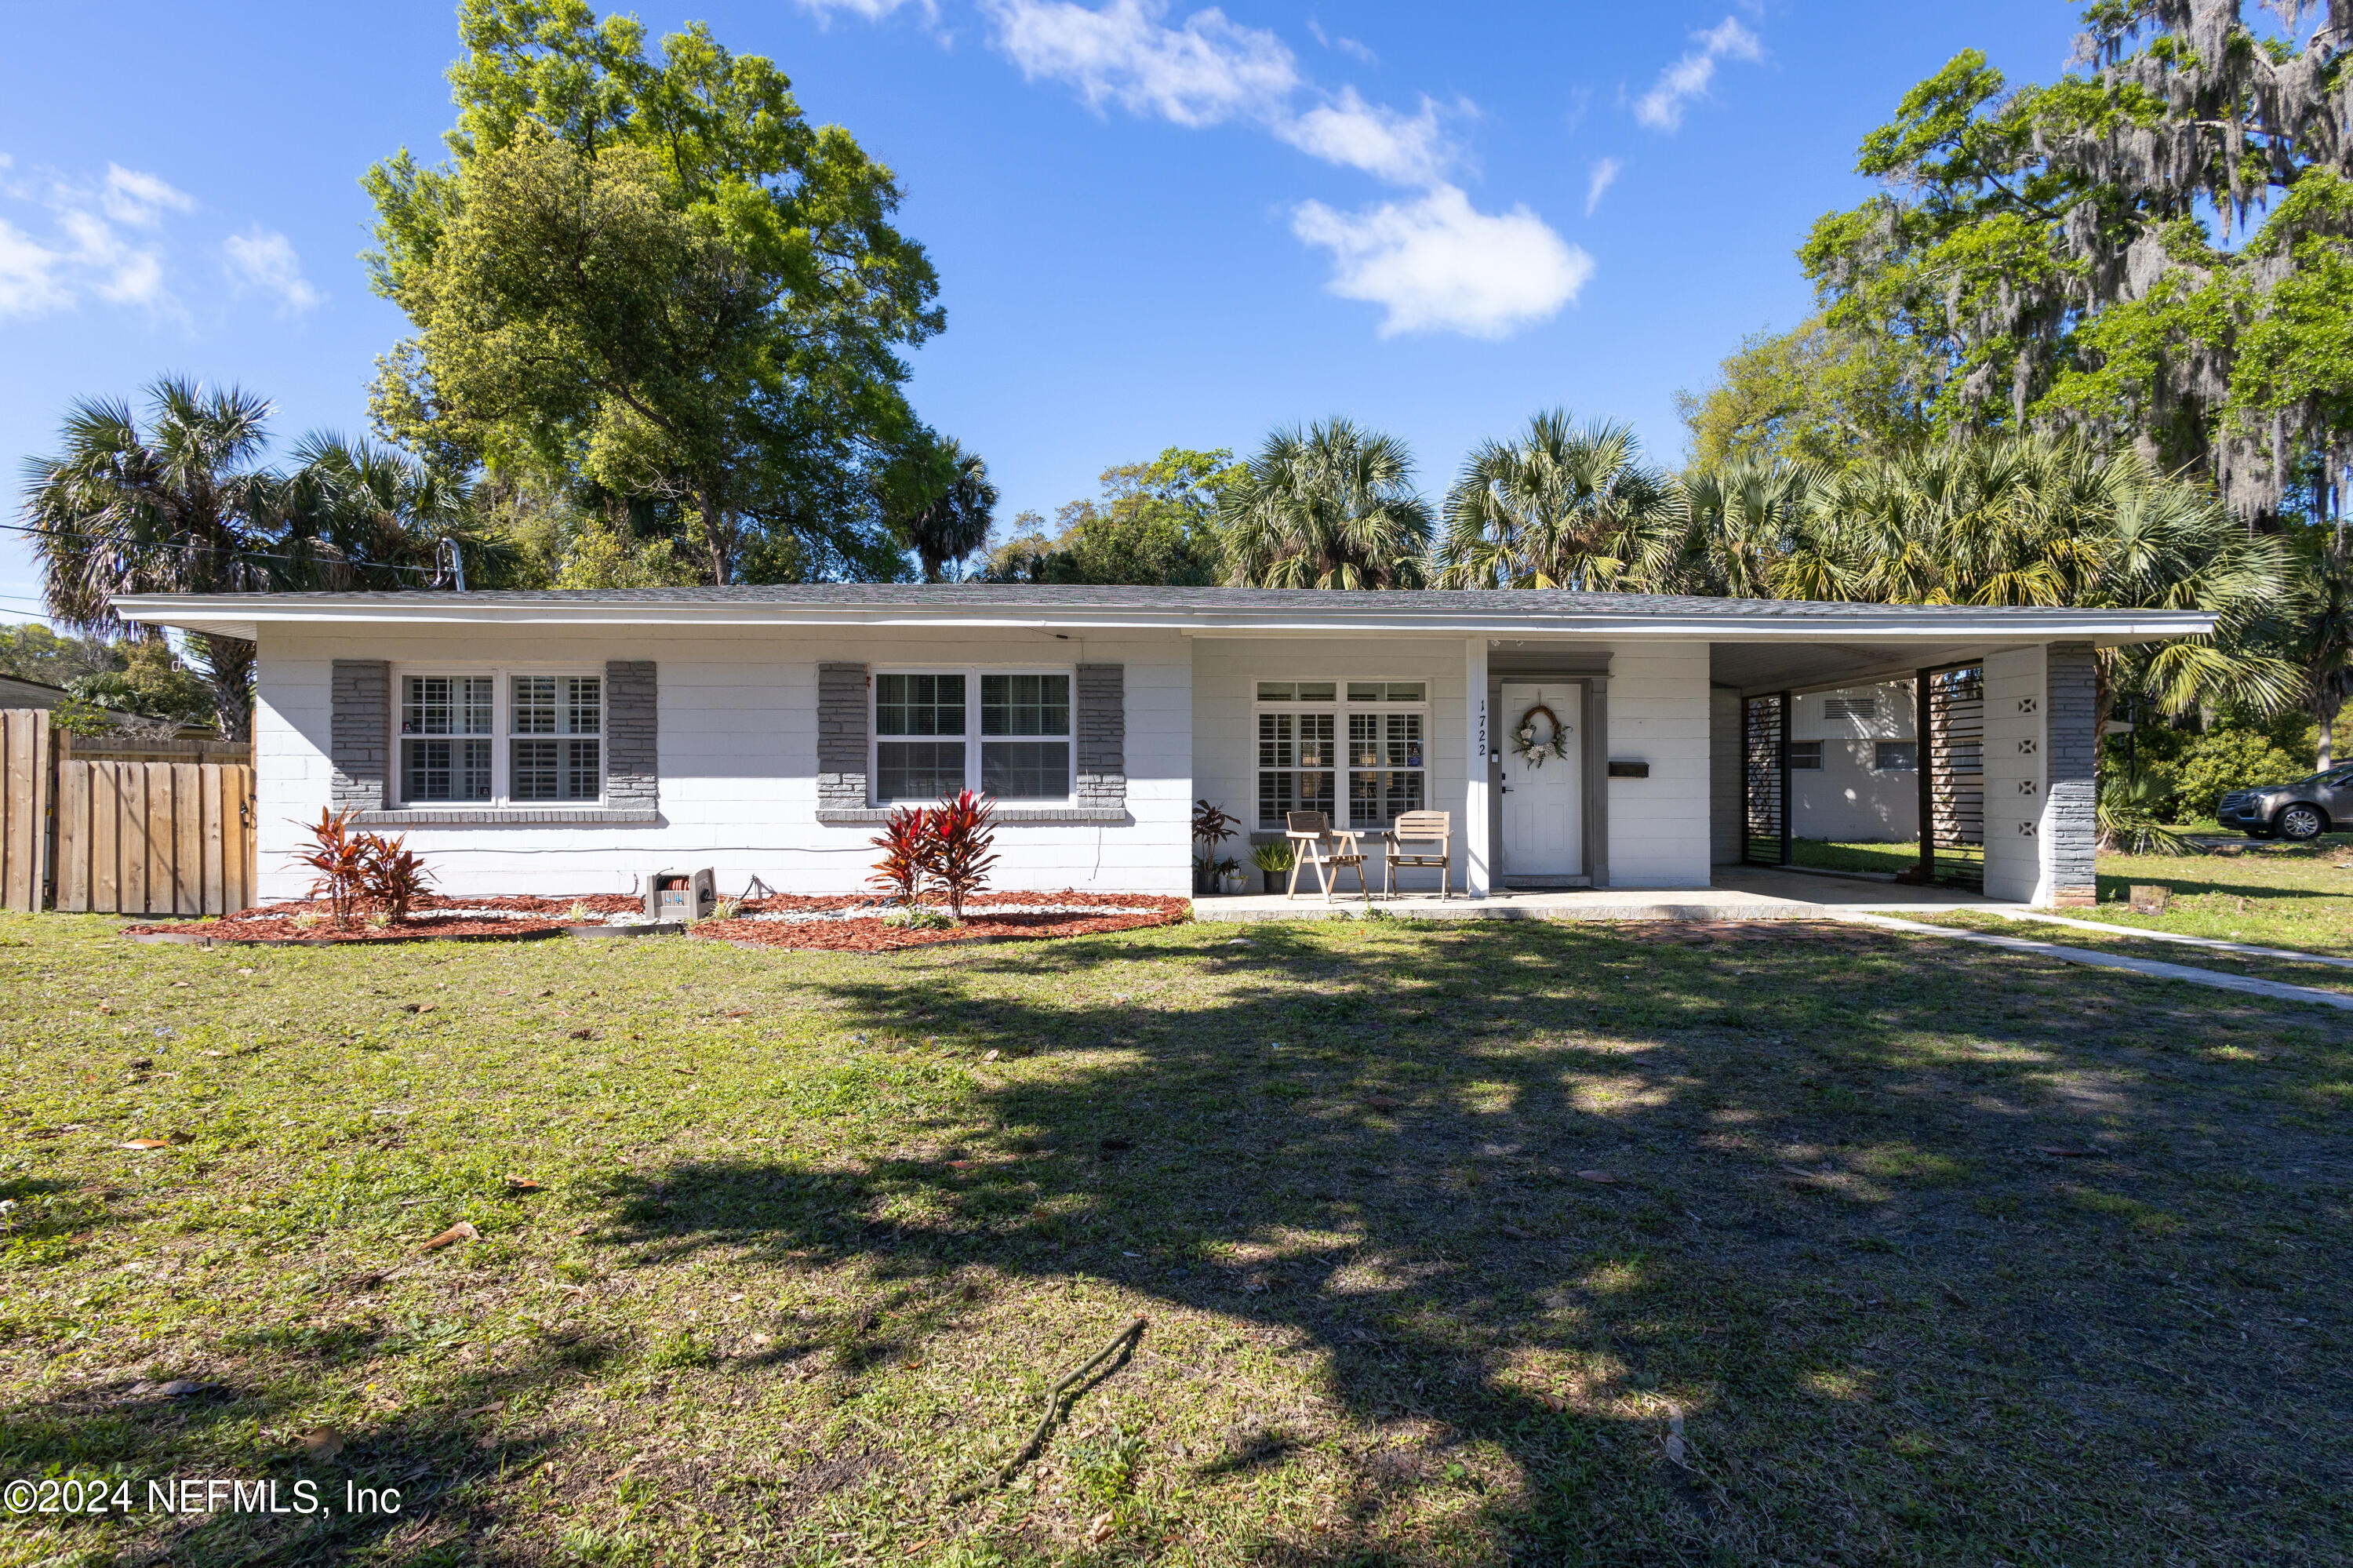 Jacksonville, FL home for sale located at 1722 PAINE Avenue, Jacksonville, FL 32211